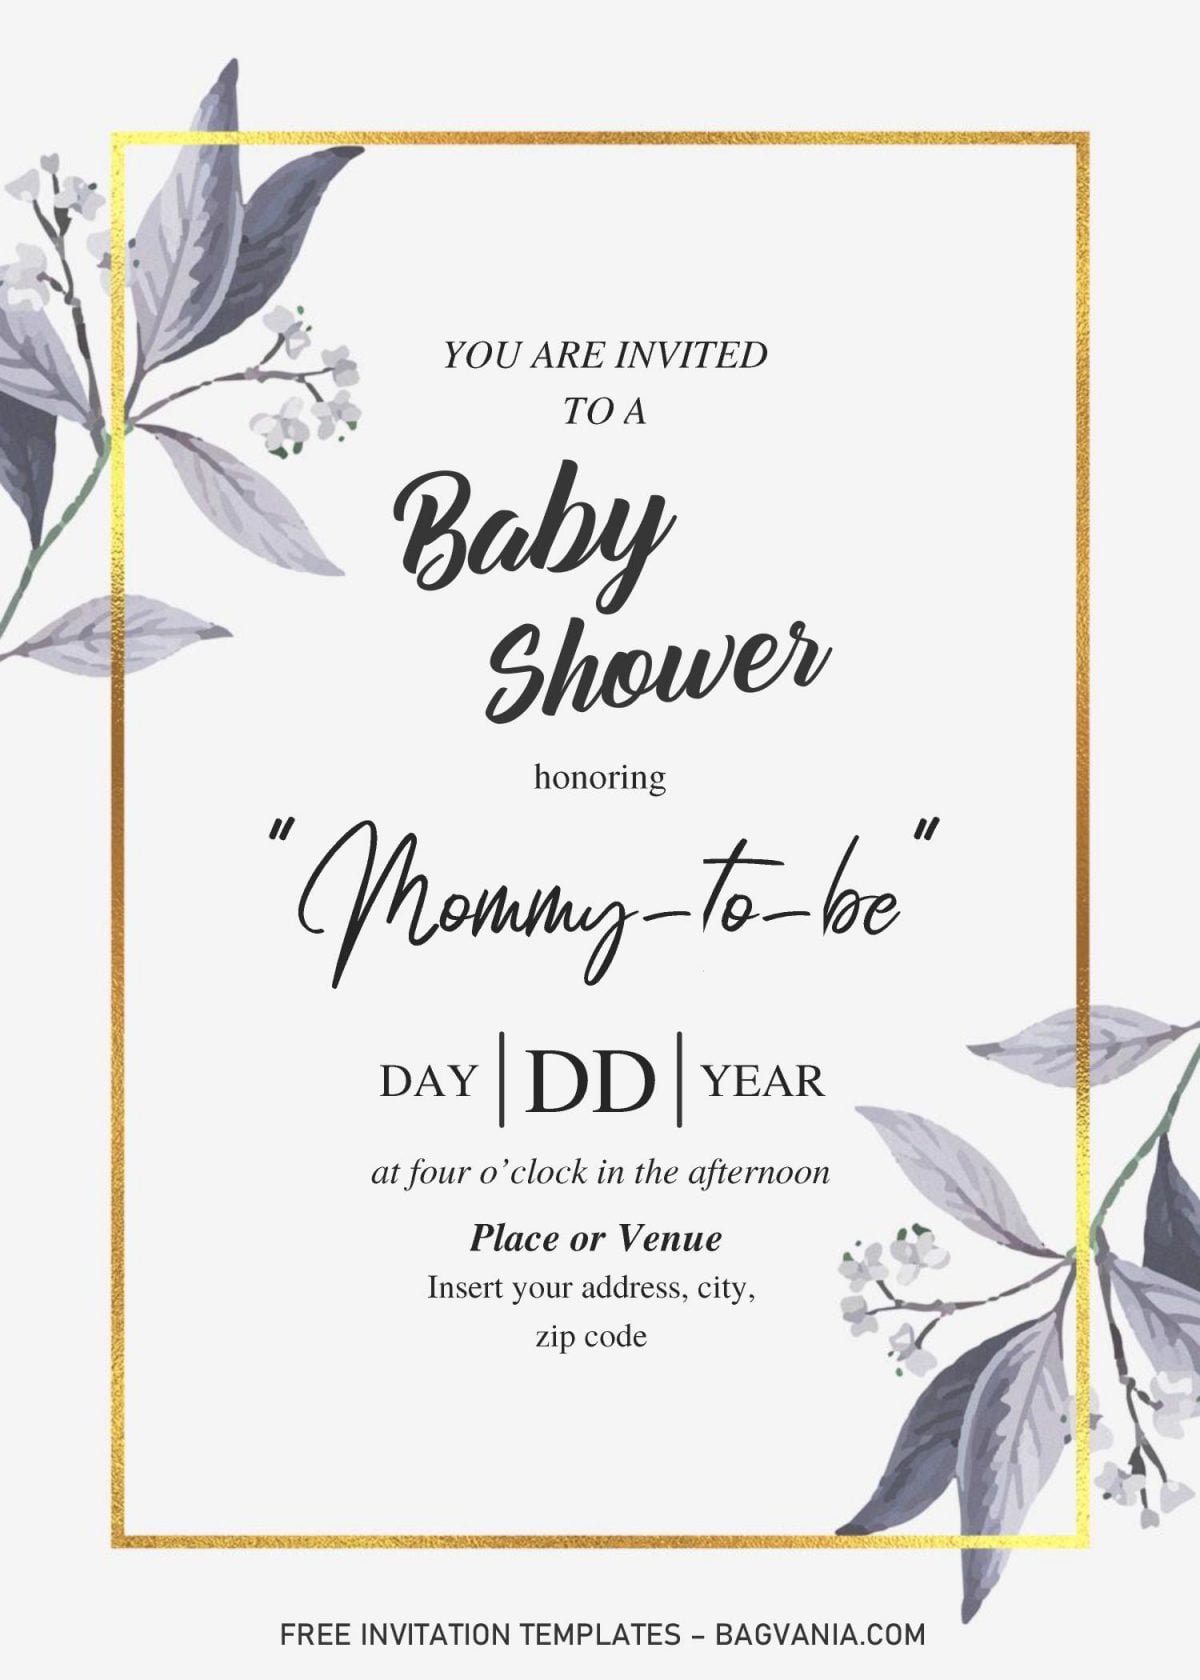 Dusty Blue Rose Baby Shower Invitation Templates - Editable With MS Word and has Gold foil text frame